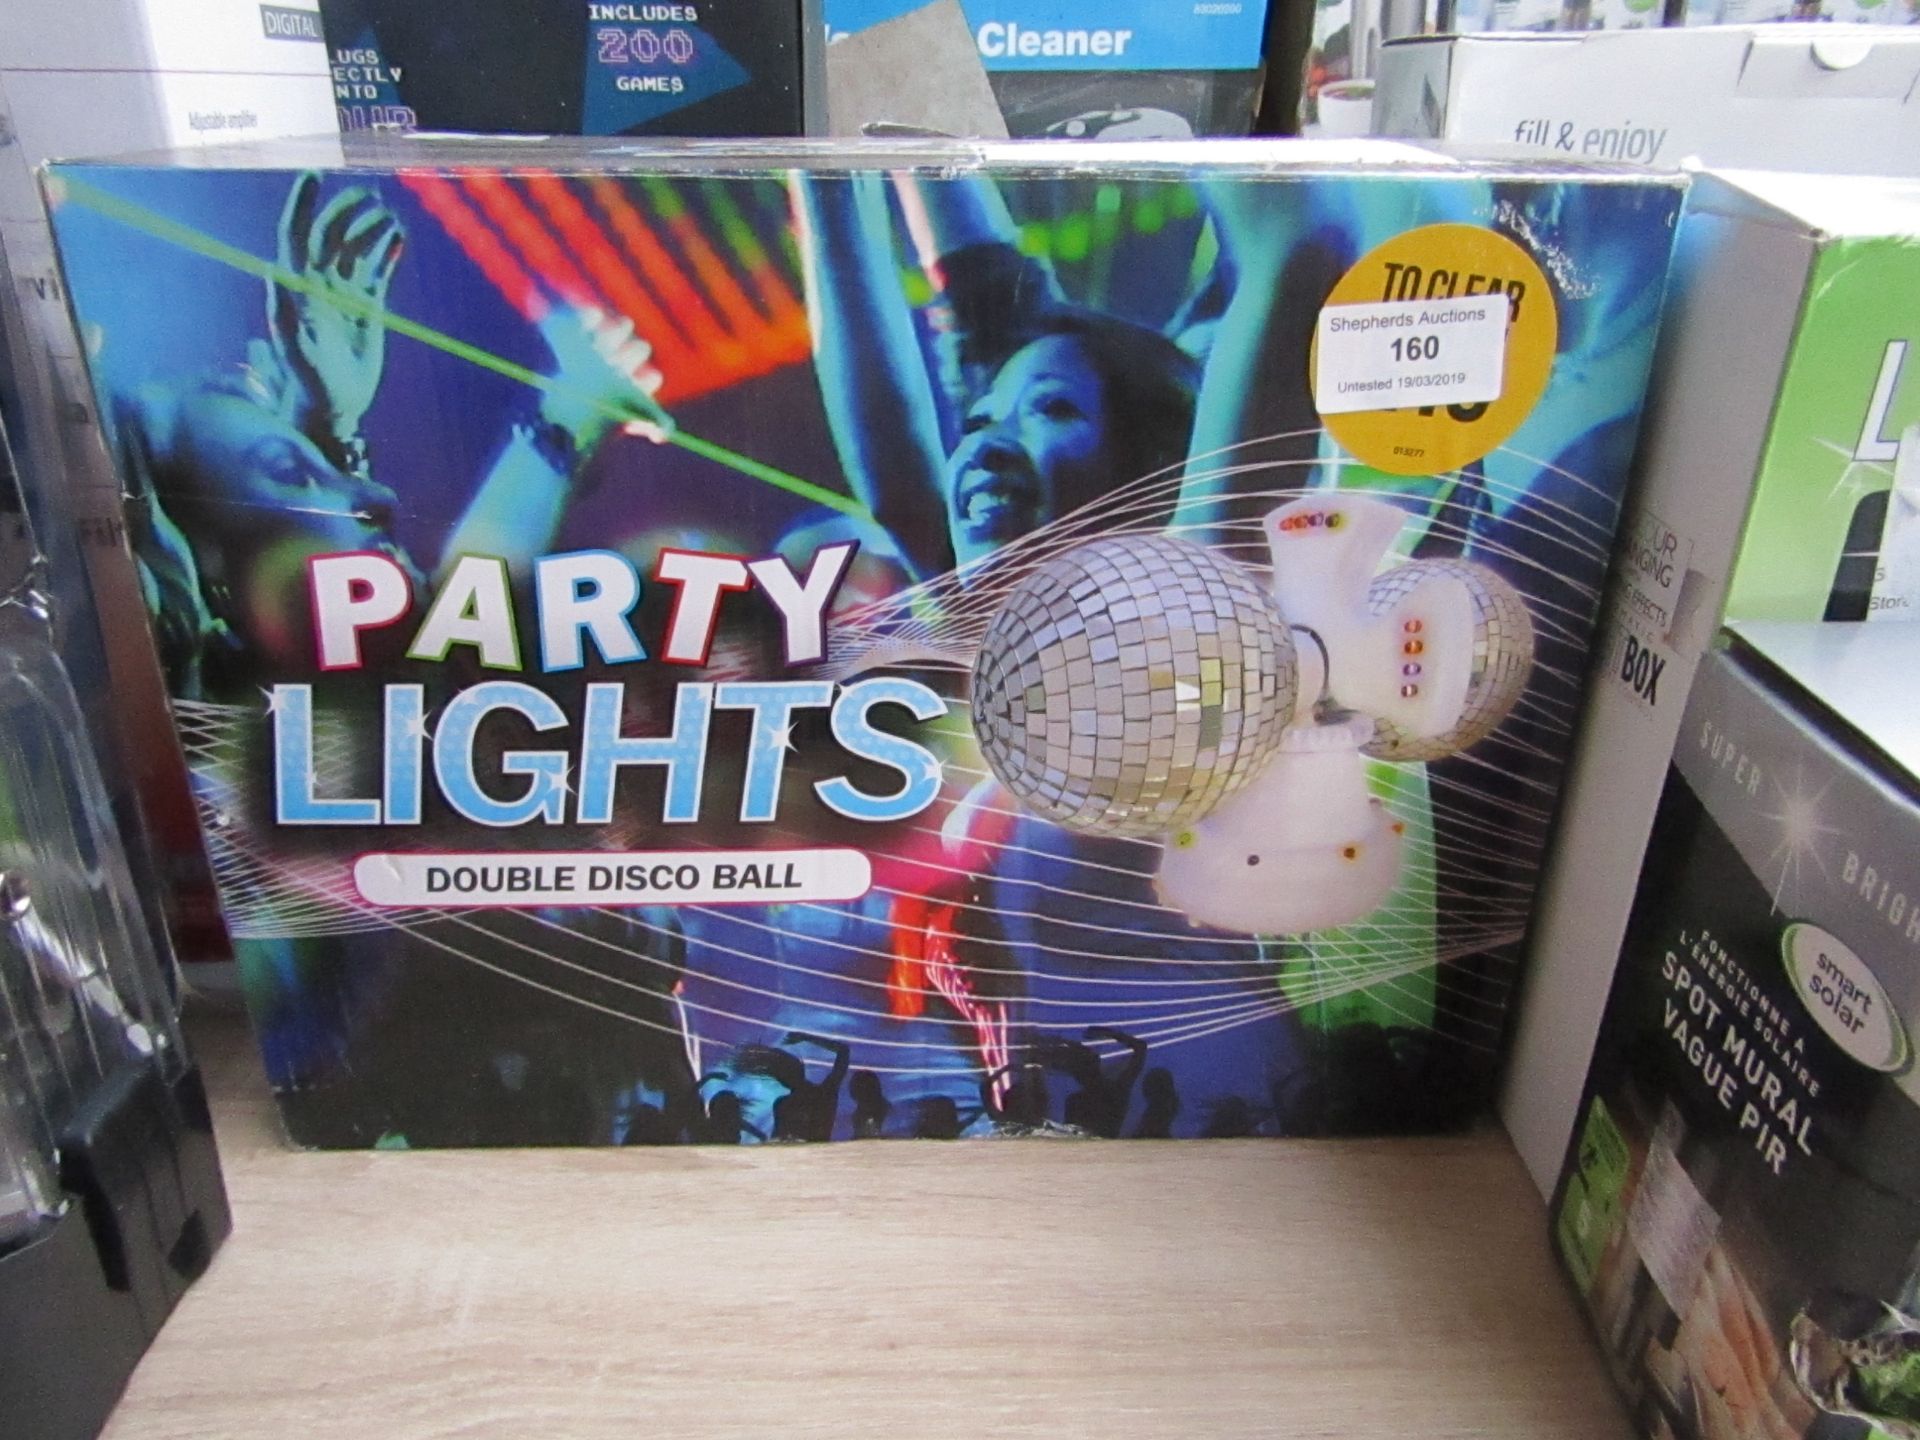 Party Lights double disco ball, boxed.